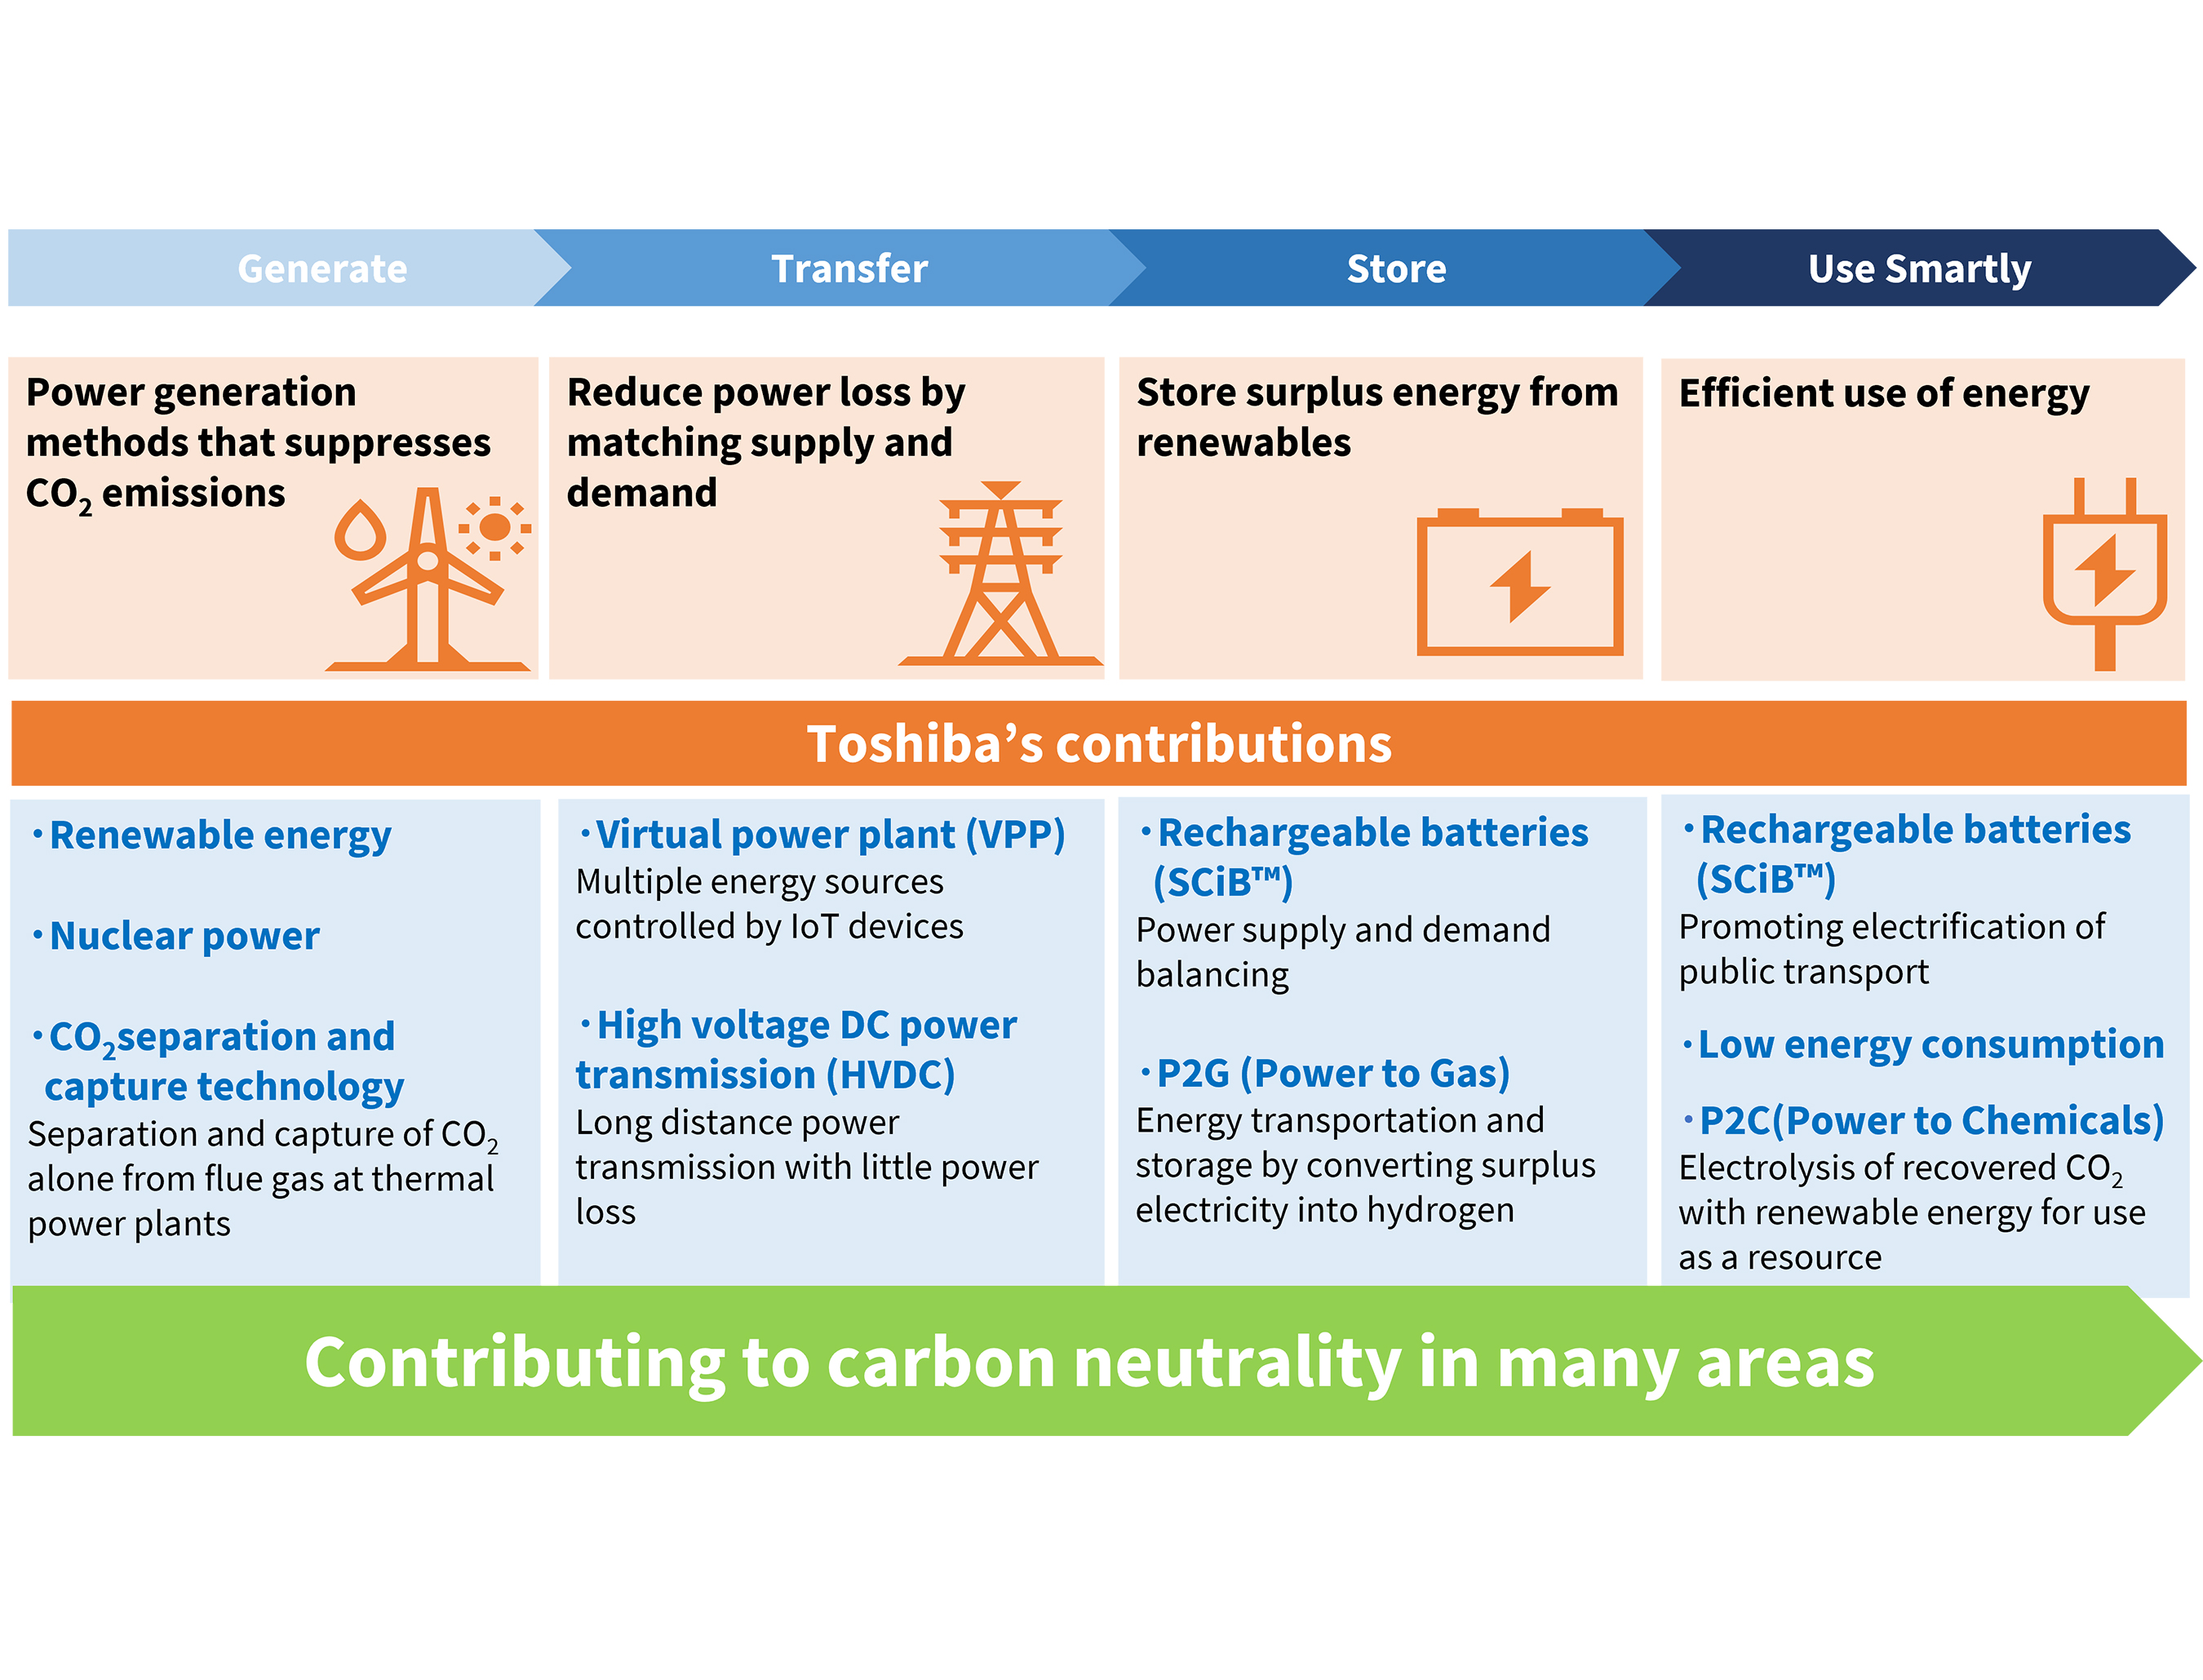 Toshiba's Contributions to Carbon Neutrality